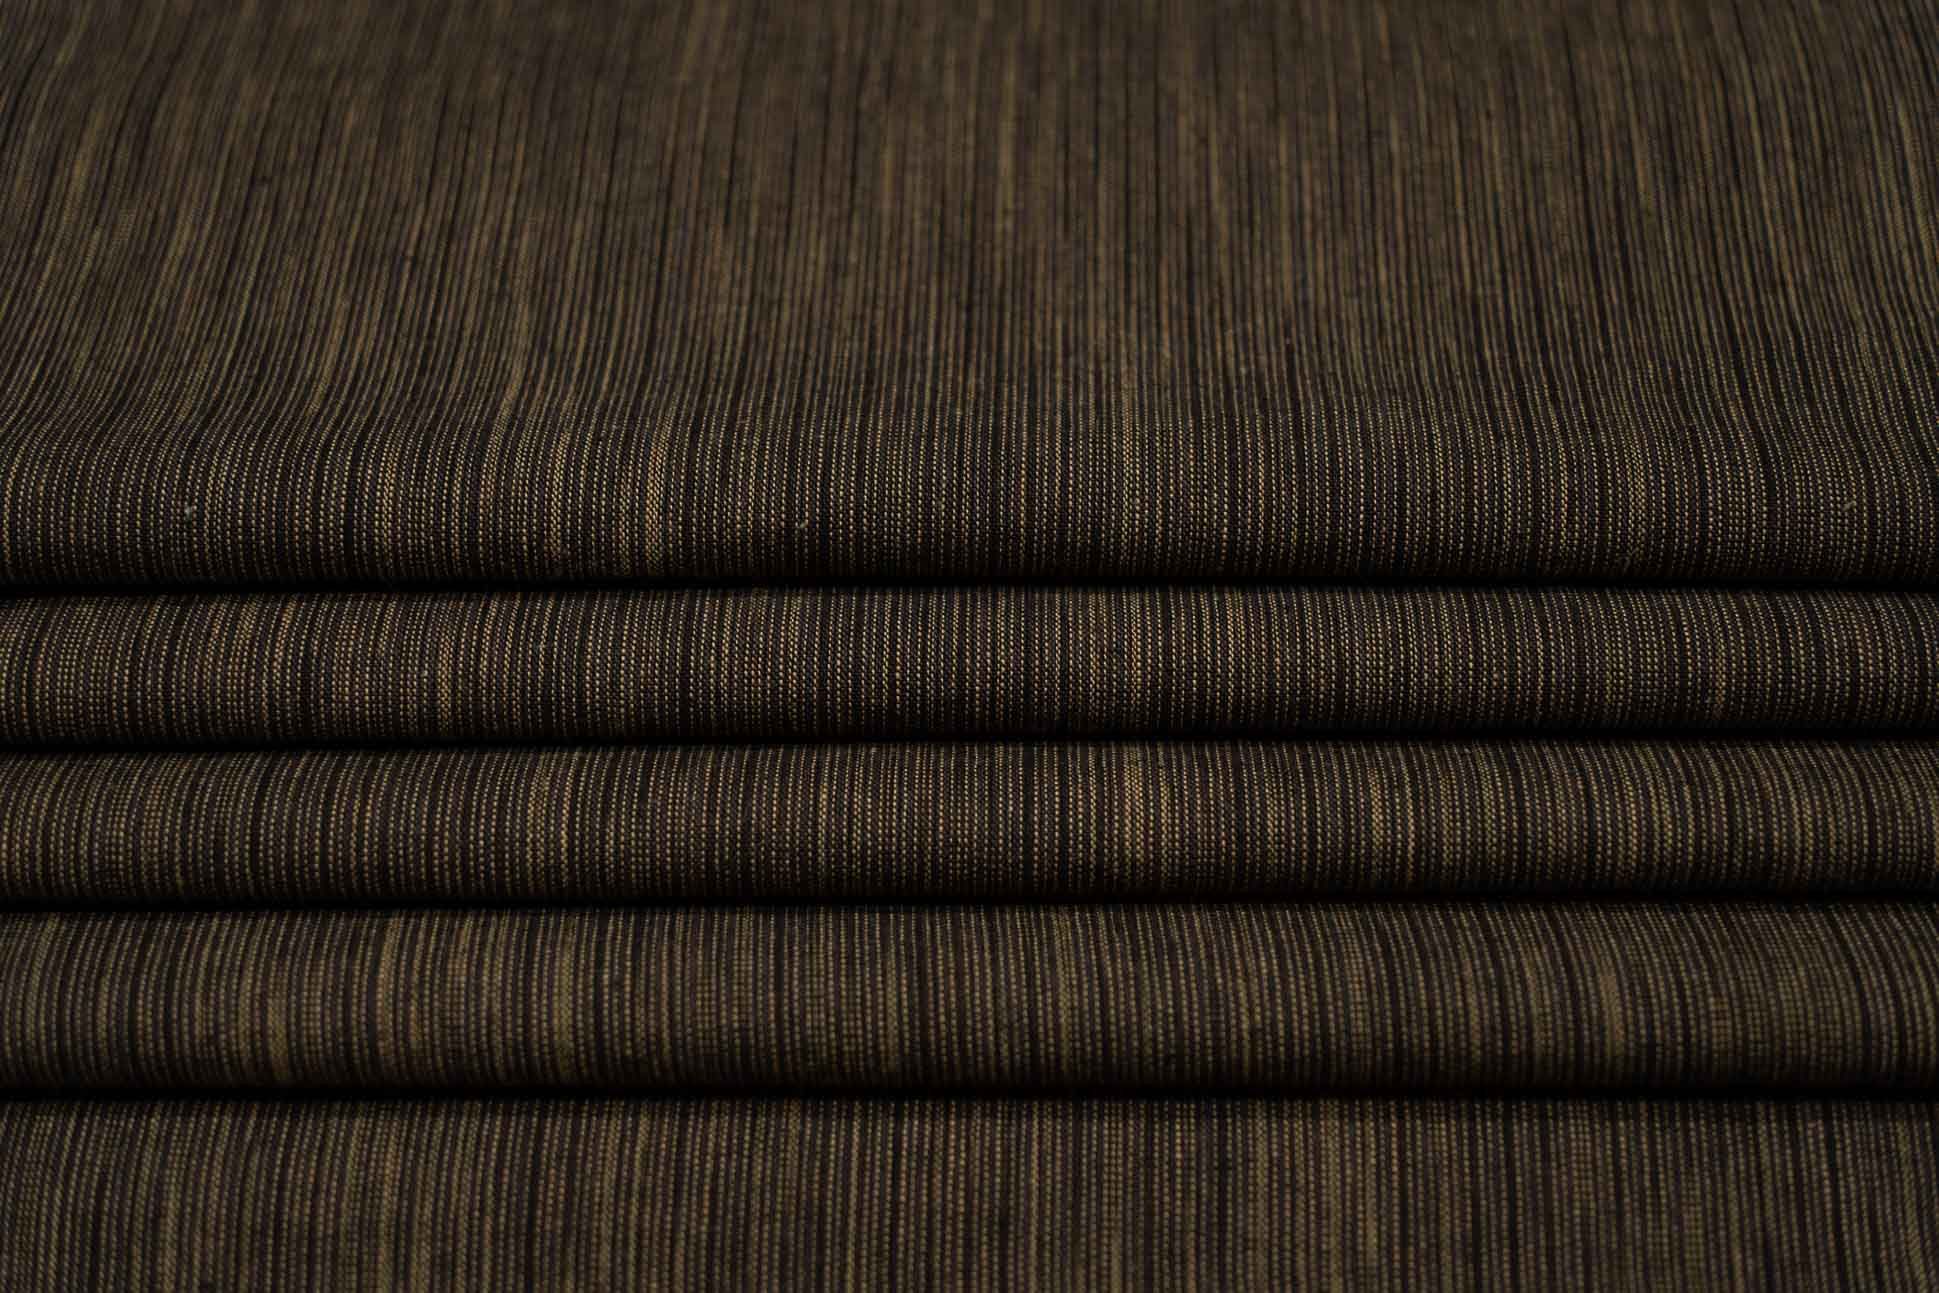 Brown Striped Handwoven Cotton Fabric